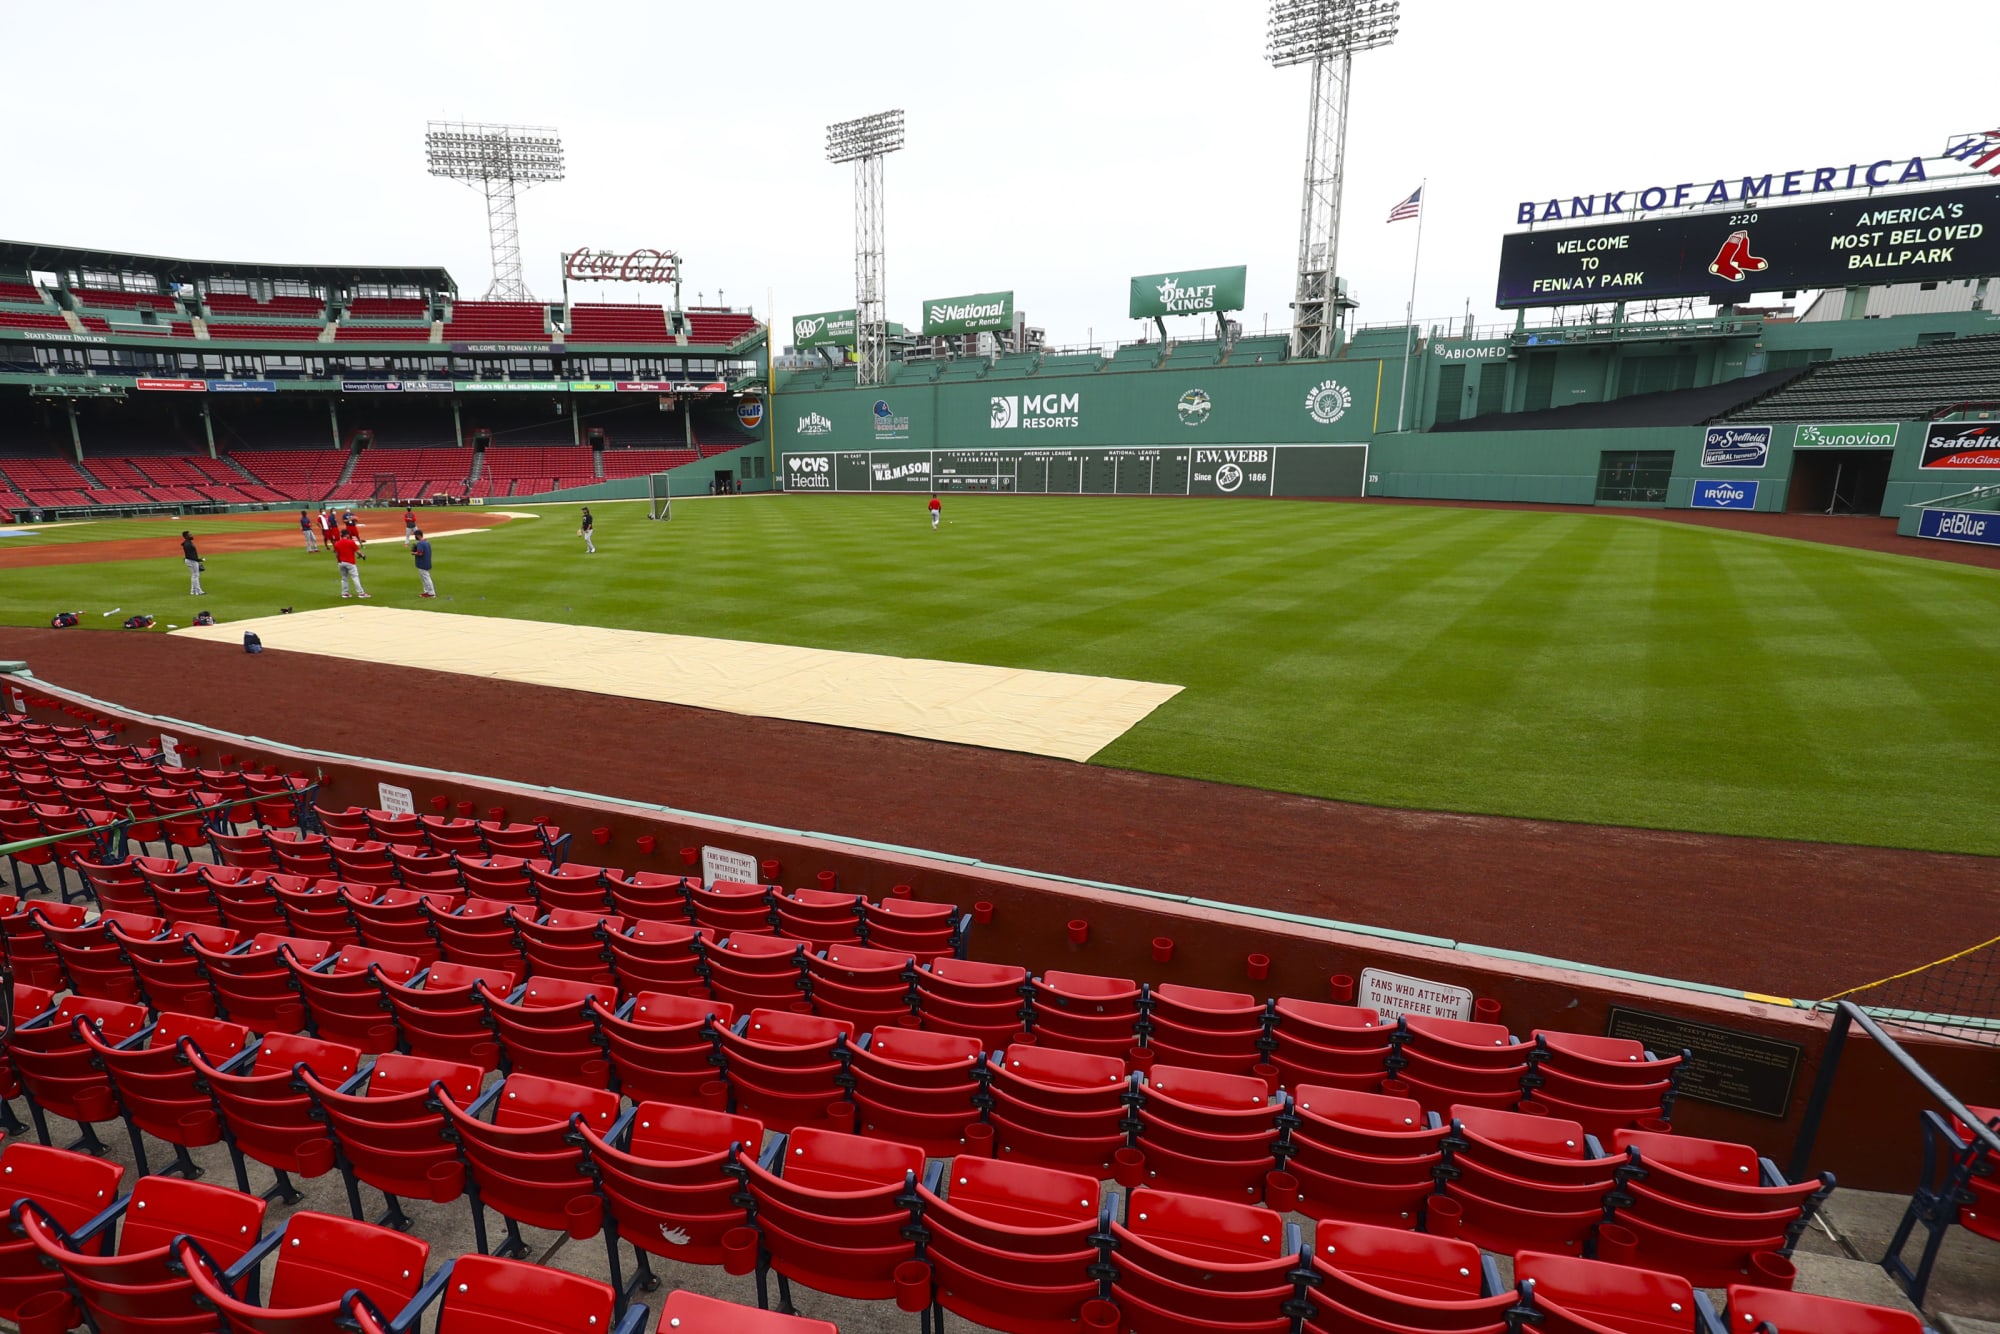 Boston Red Sox The low point of attendance at Fenway Park